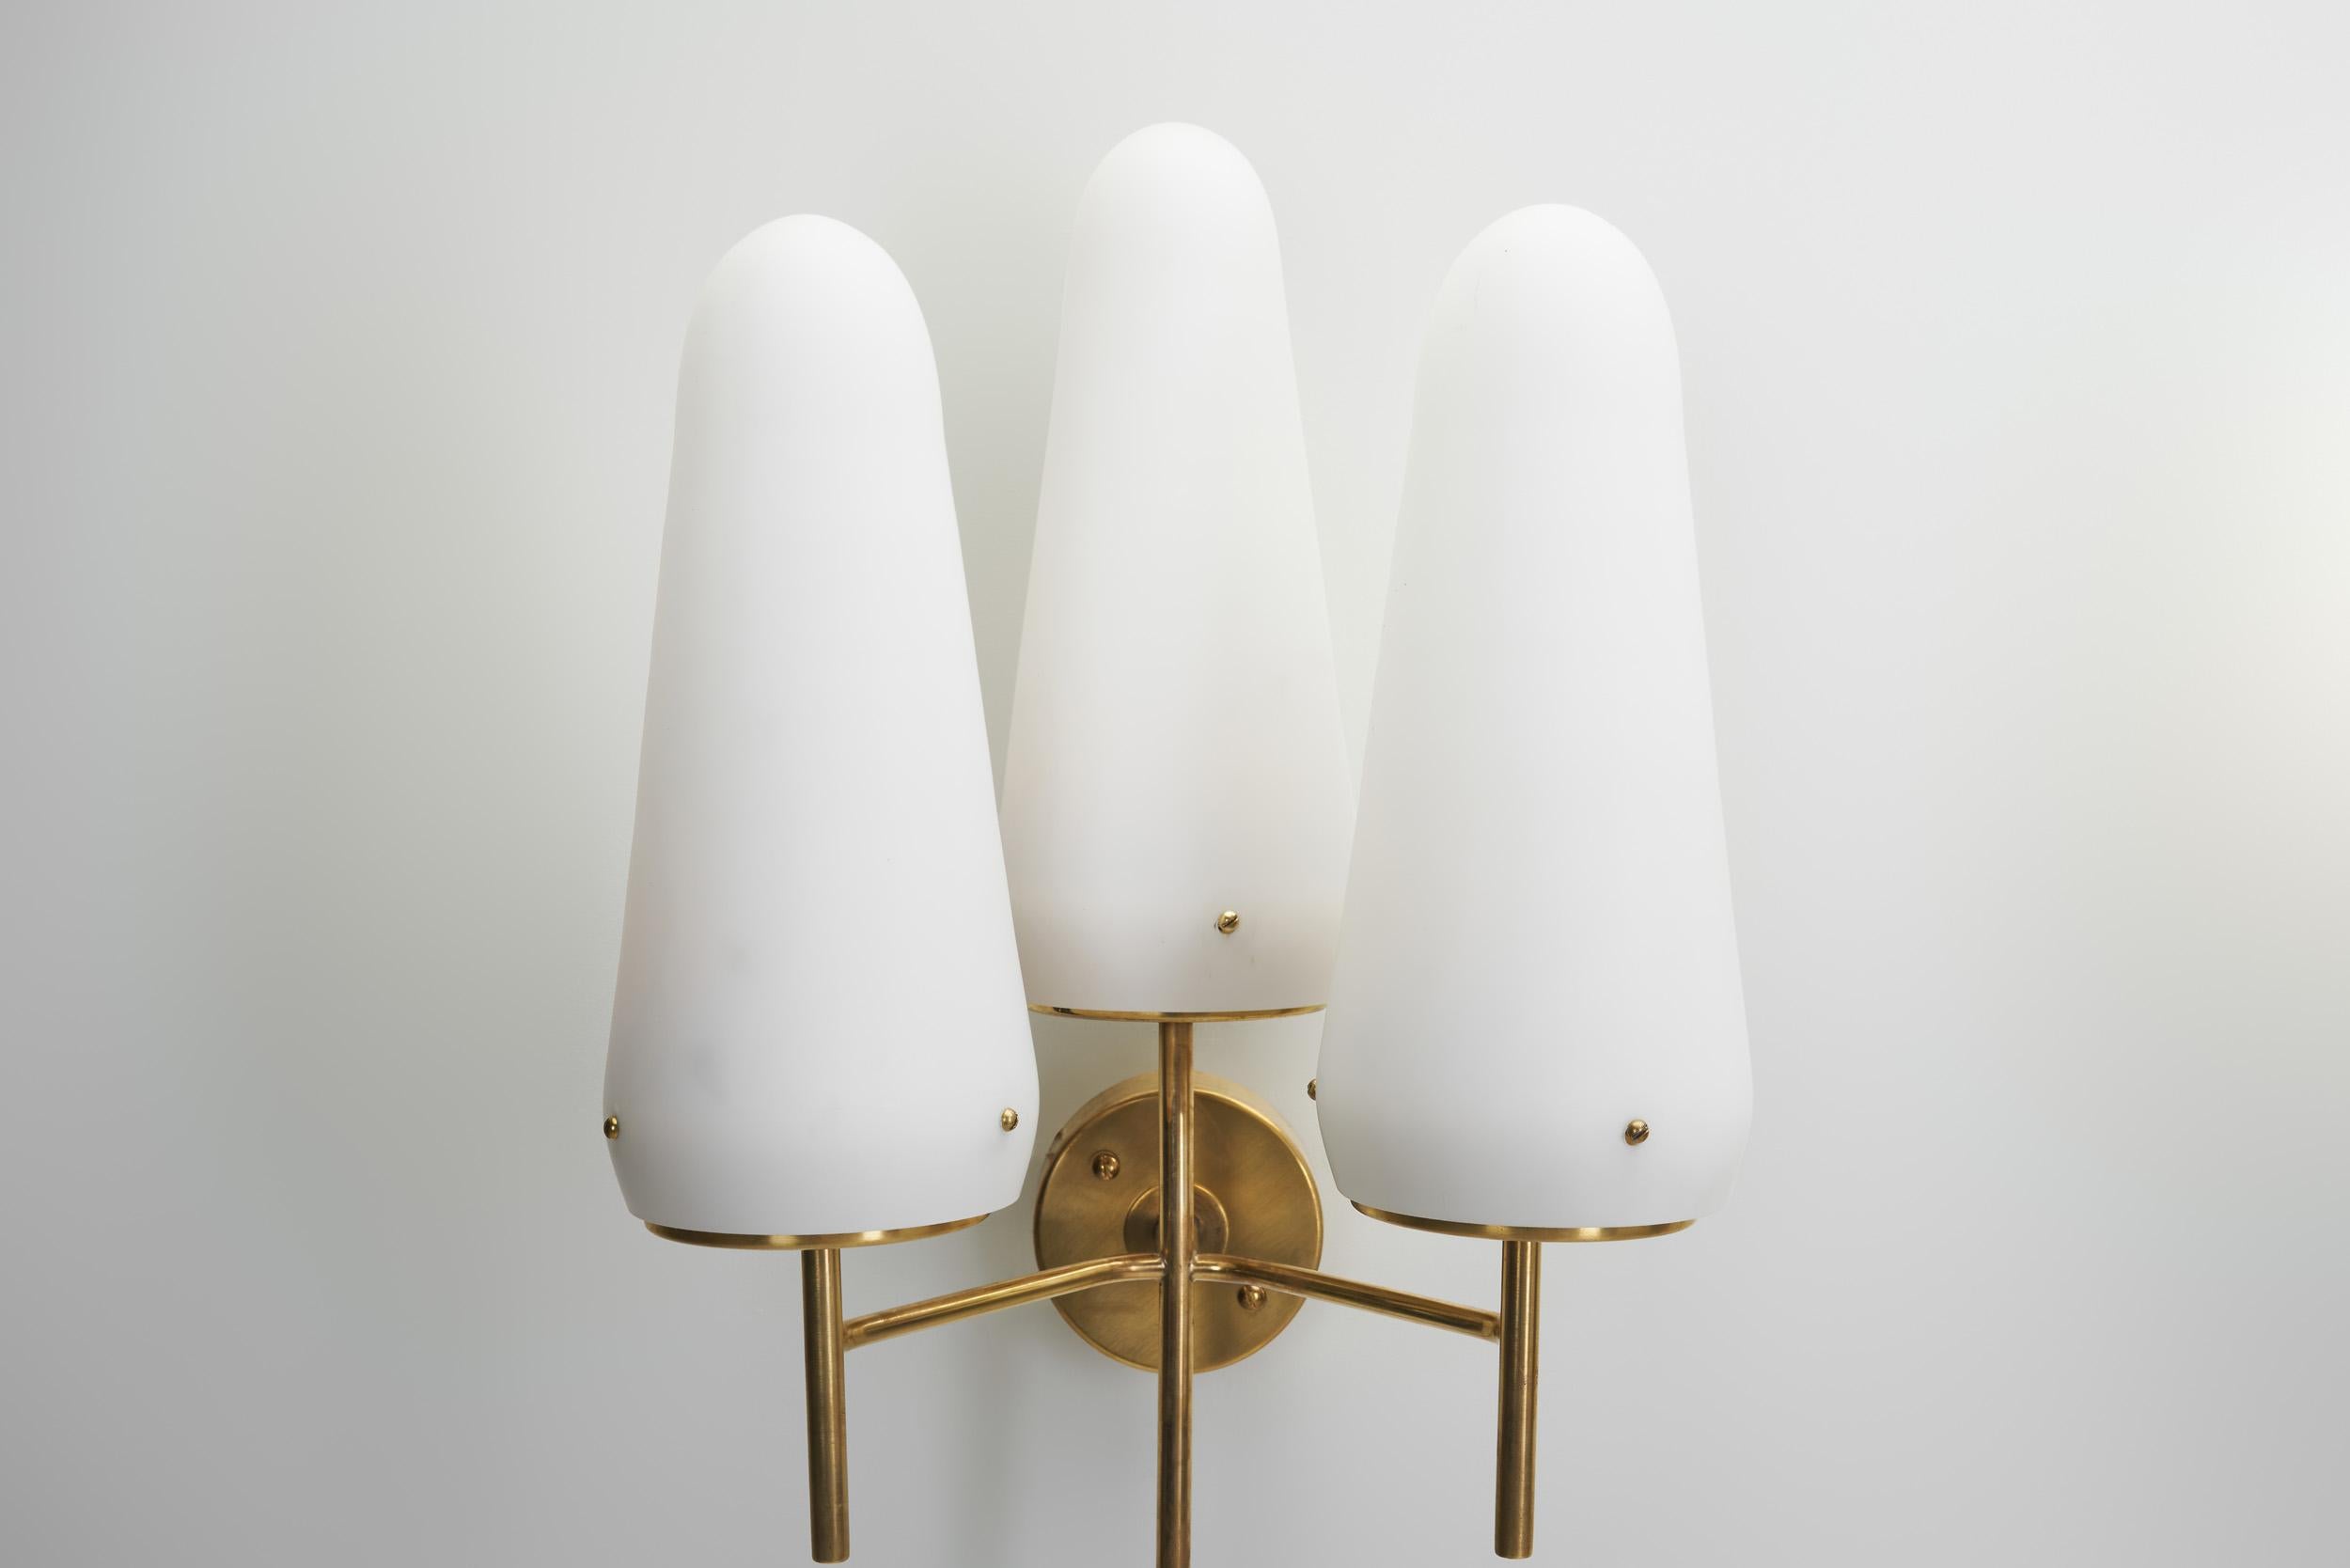 Hans Agne Jakobsson Brass and Glass Wall Sconces for AB Markaryd, Sweden 1950s For Sale 5